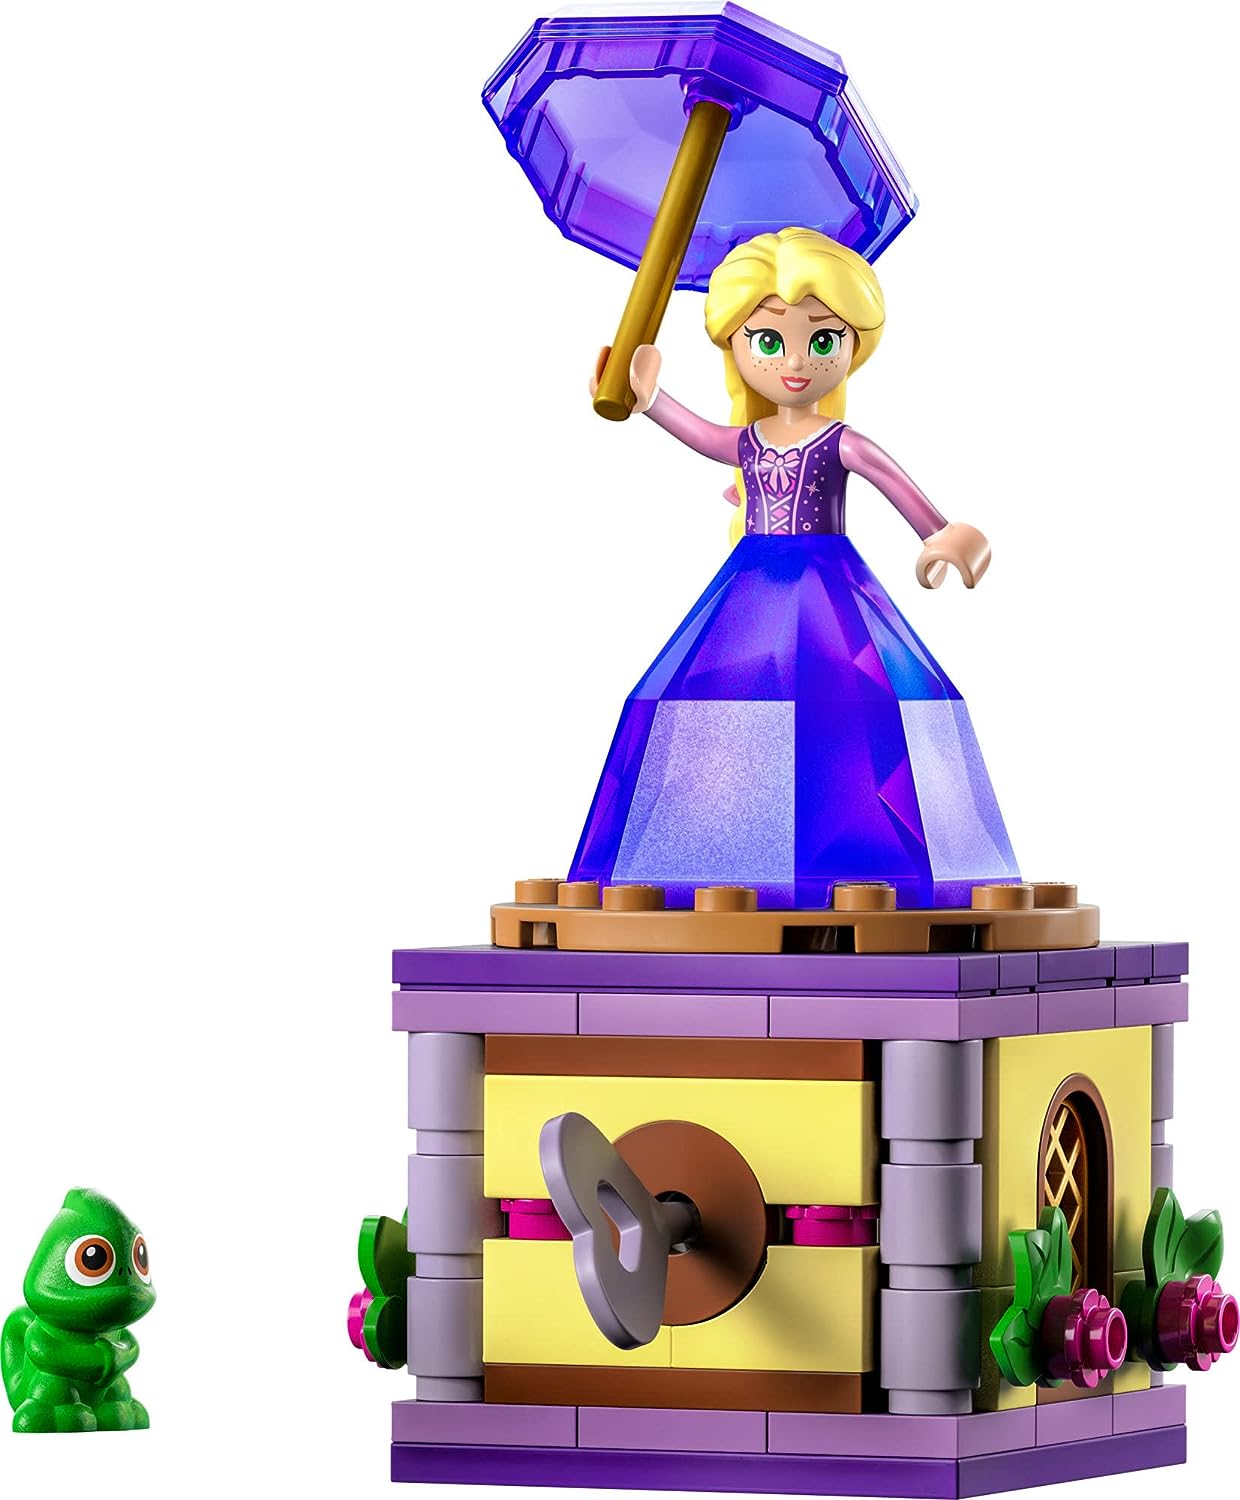 LEGO 43214 Disney Princess Twirling Rapunzel Building Toy with Diamond Dress Mini-Doll and Pascal The Chameleon Figure, Wind Up Toy Rapunzel.